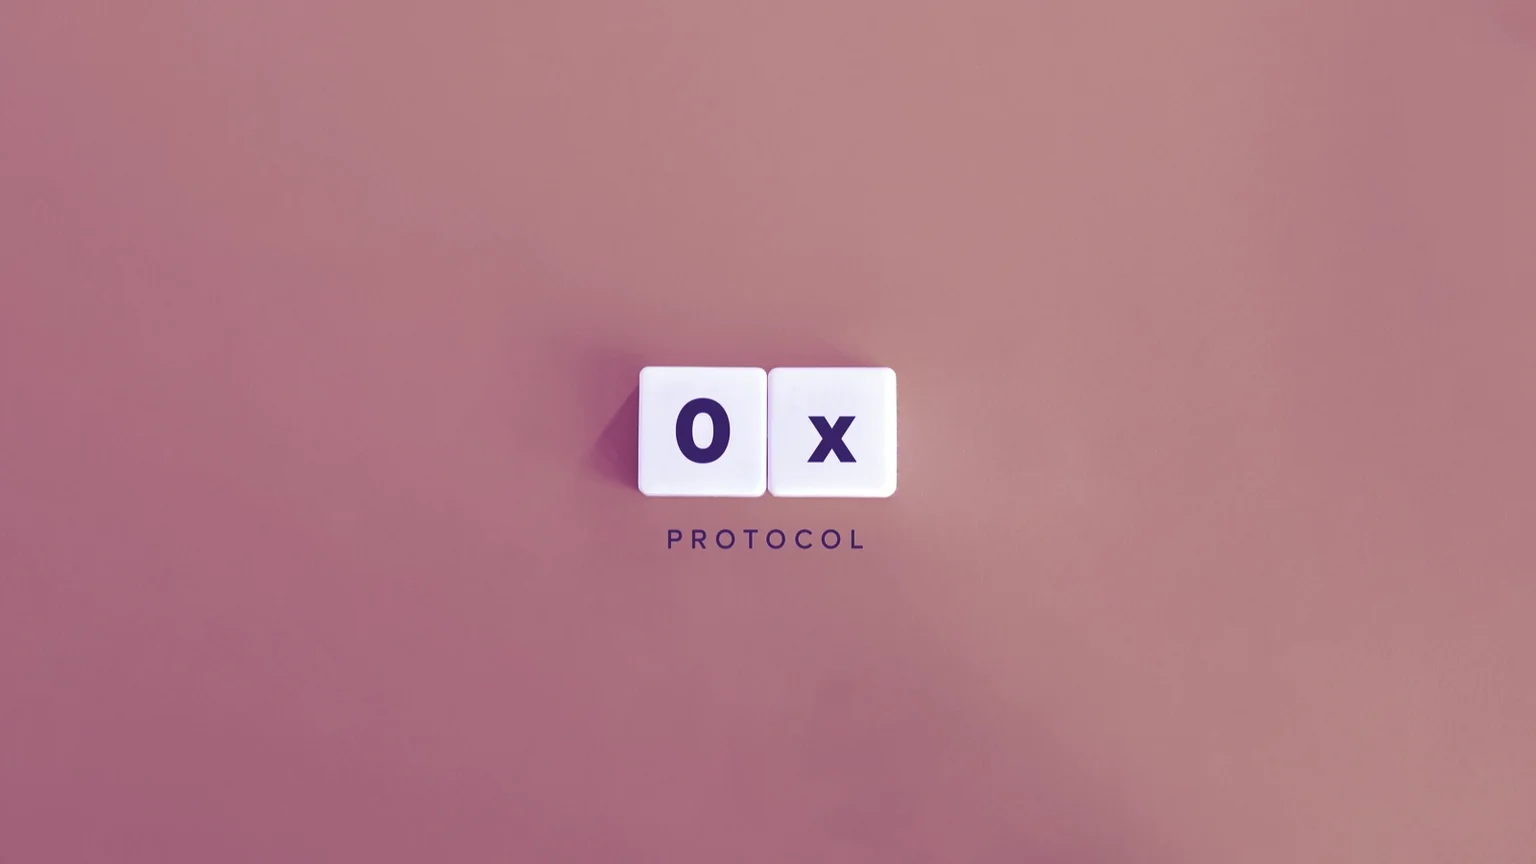 0x Protocol is a decentralized exchange platform initially built on Ethereum. Image: Shutterstock.